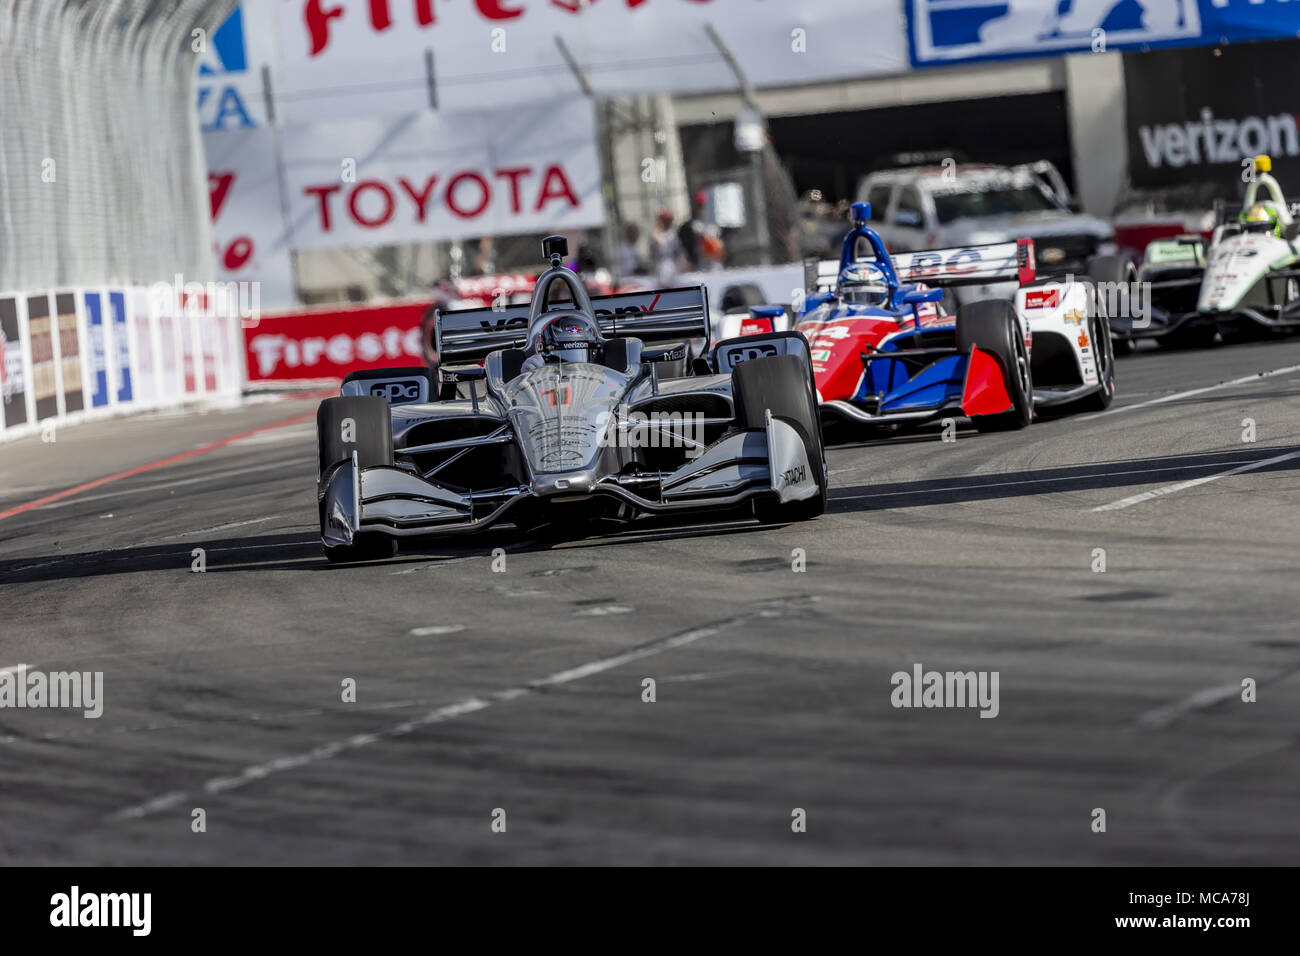 April 13, 2018 - Long Beach, California, United States of America - April 13, 2018 - Long Beach, California, USA: Josef Newgarden (1) brings his race car through the turns during the Toyota Grand Prix of Long Beach race at the Streets of Long Beach in Long Beach, California. (Credit Image: © Walter G Arce Sr Asp Inc/ASP via ZUMA Wire) Stock Photo